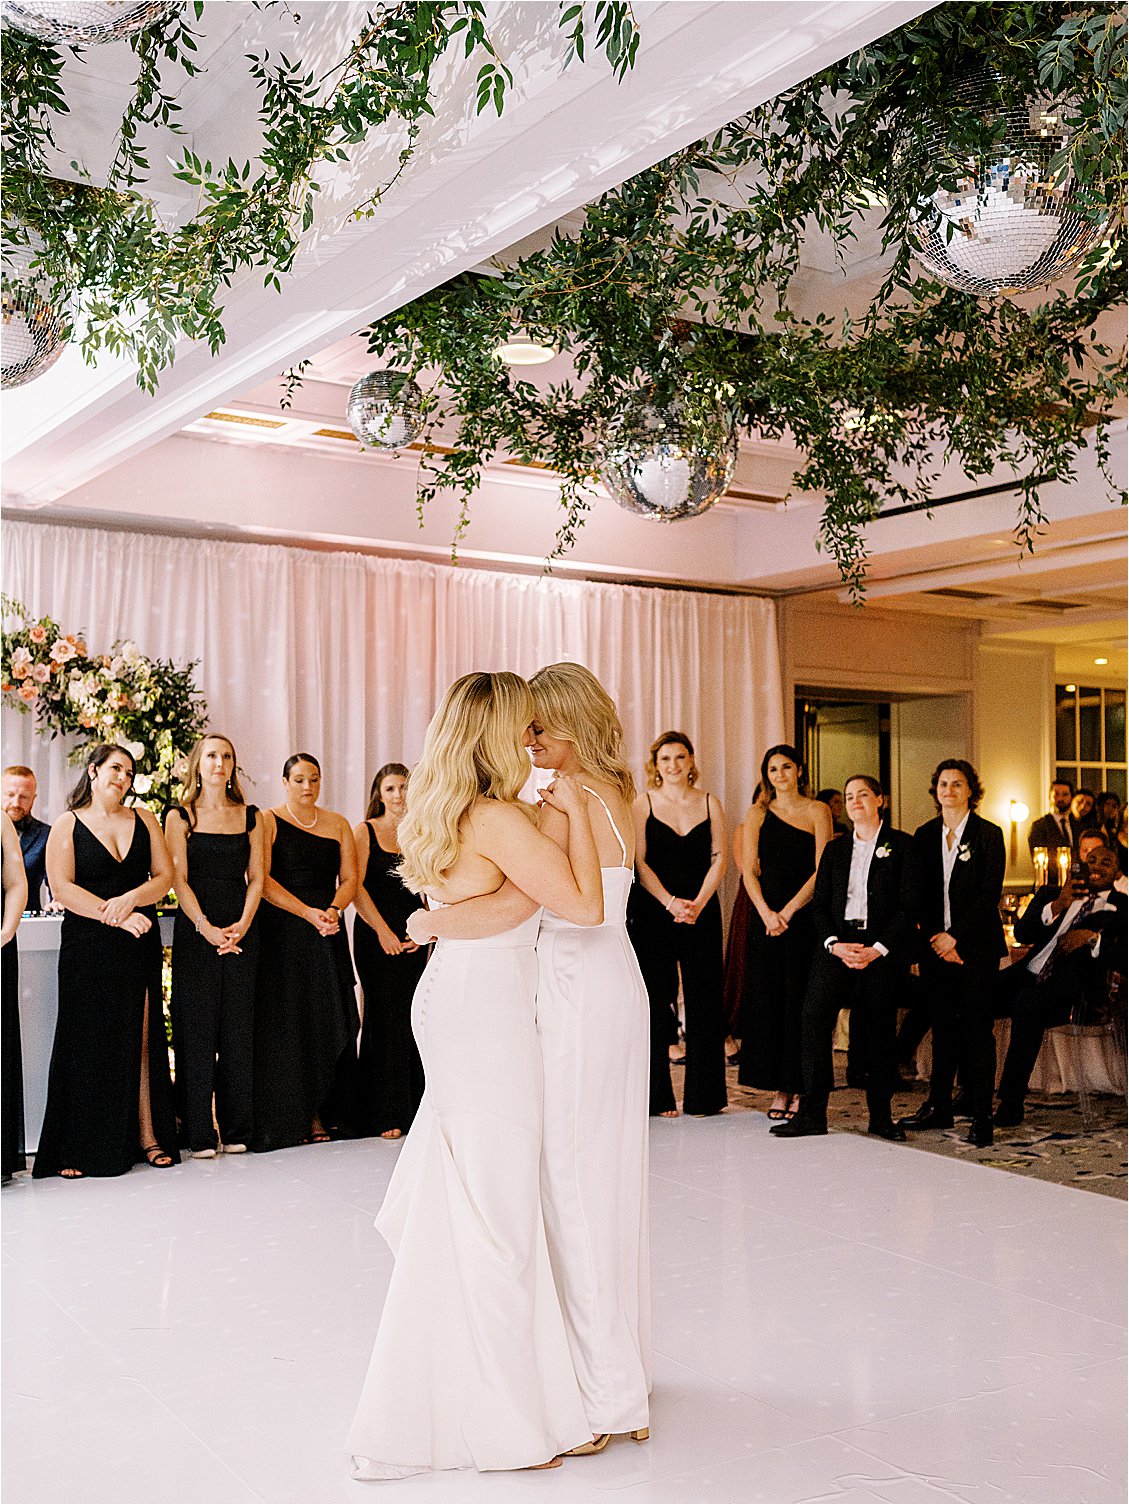 Brides share their first dance under a ceiling installation of greenery and disco balls